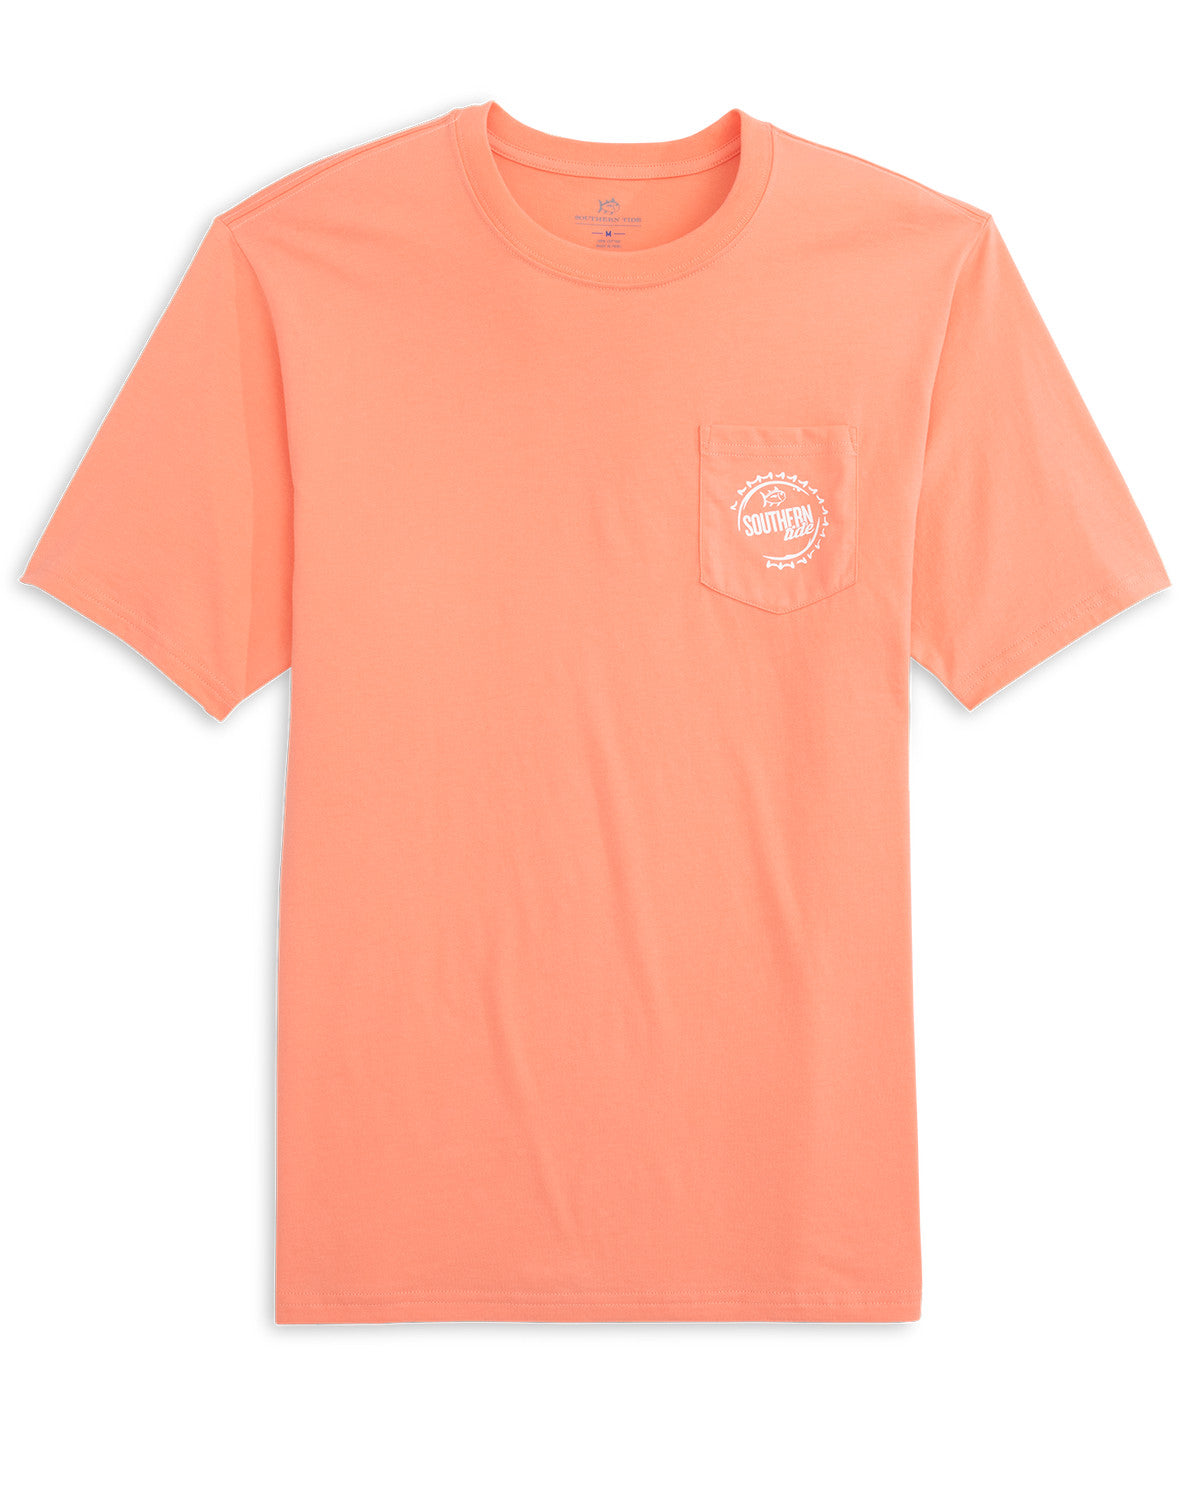 Caps Off Badge T-Shirt in Dusty Coral